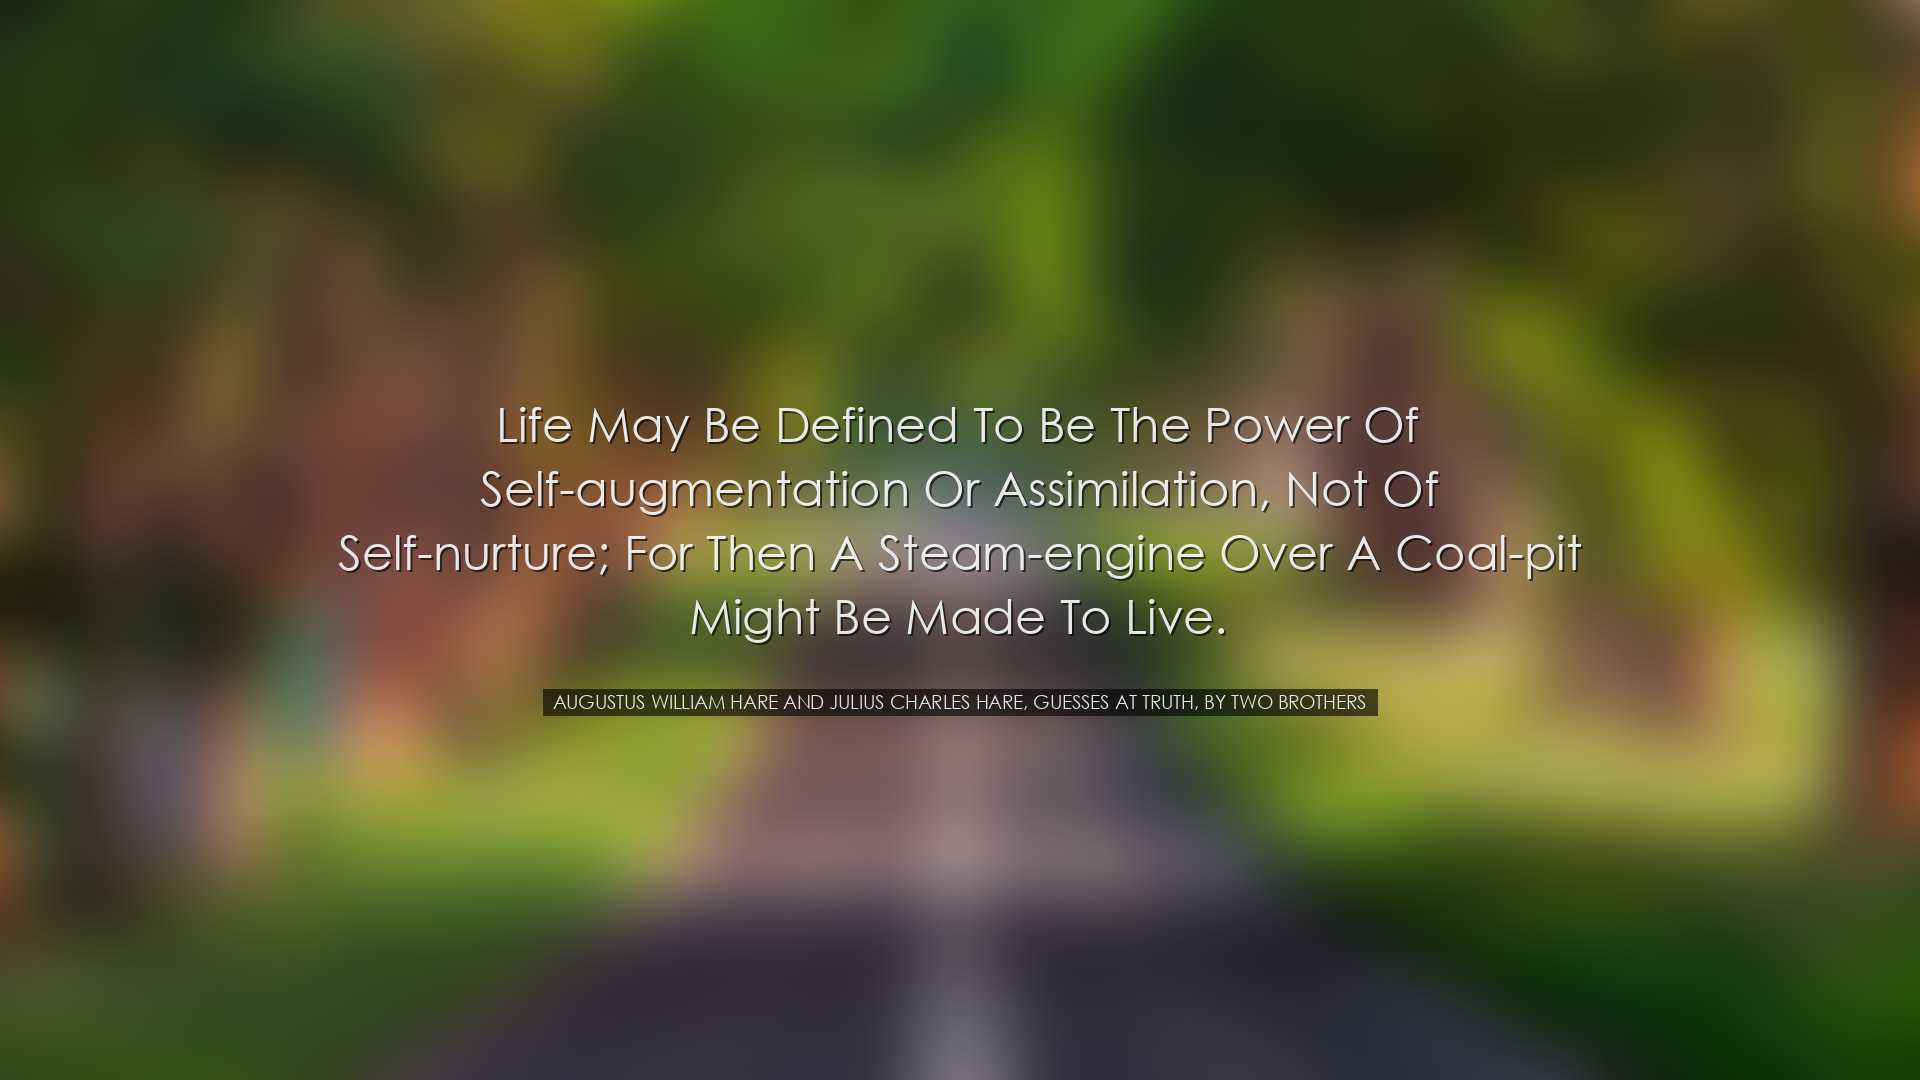 Life may be defined to be the power of self-augmentation or assimi